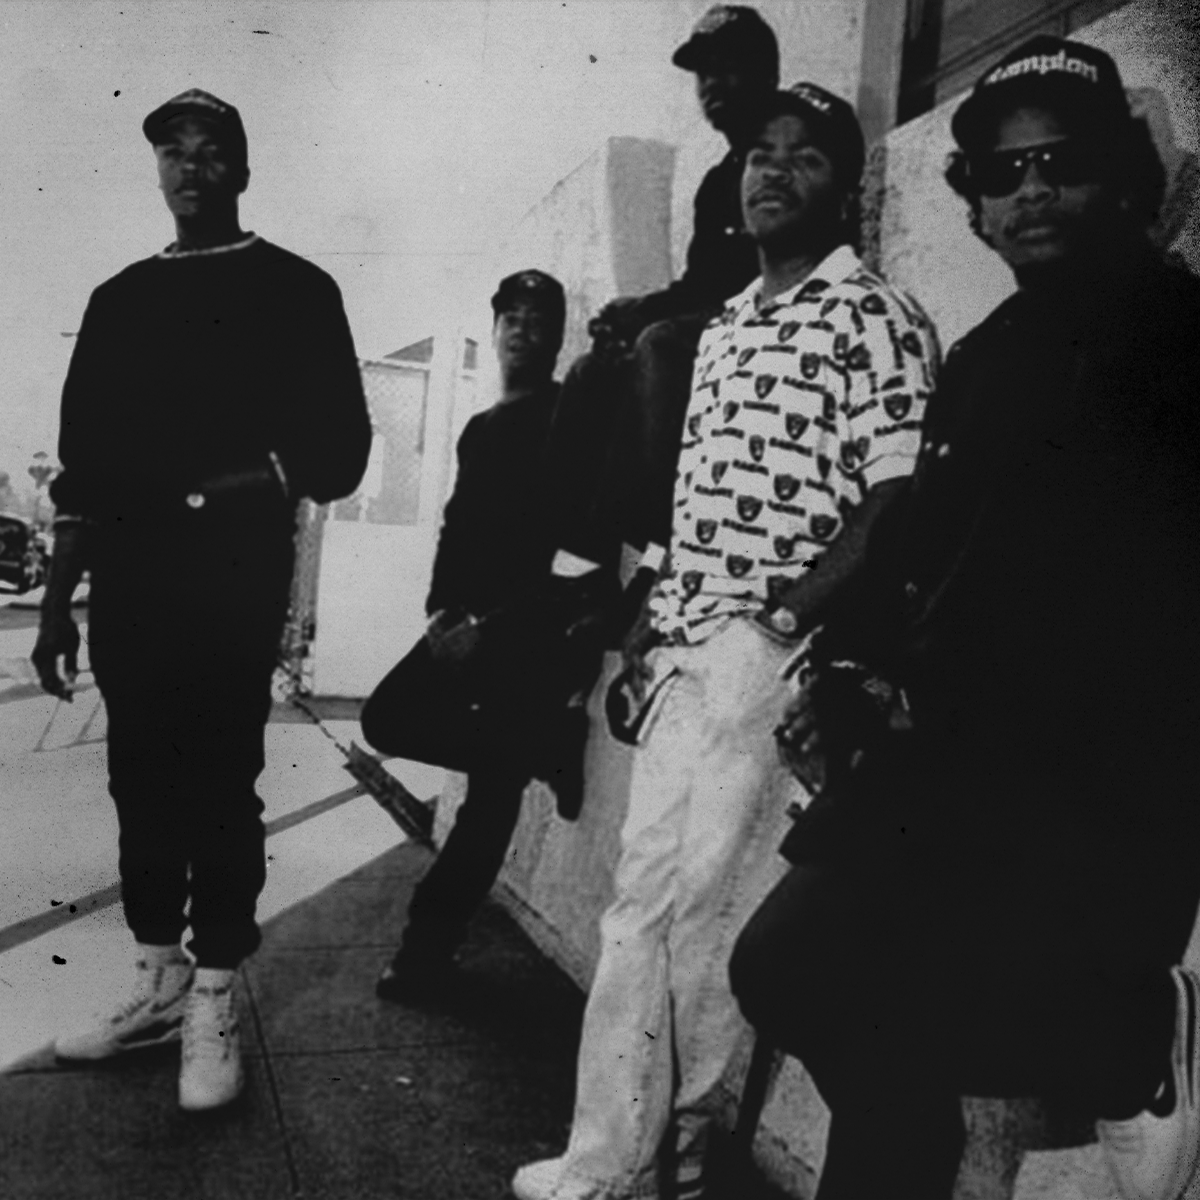 Dope N.W.A-inspired playlist out now on @Spotify. http://t.co/gAEL8MT02c http://t.co/TQOke09OCn